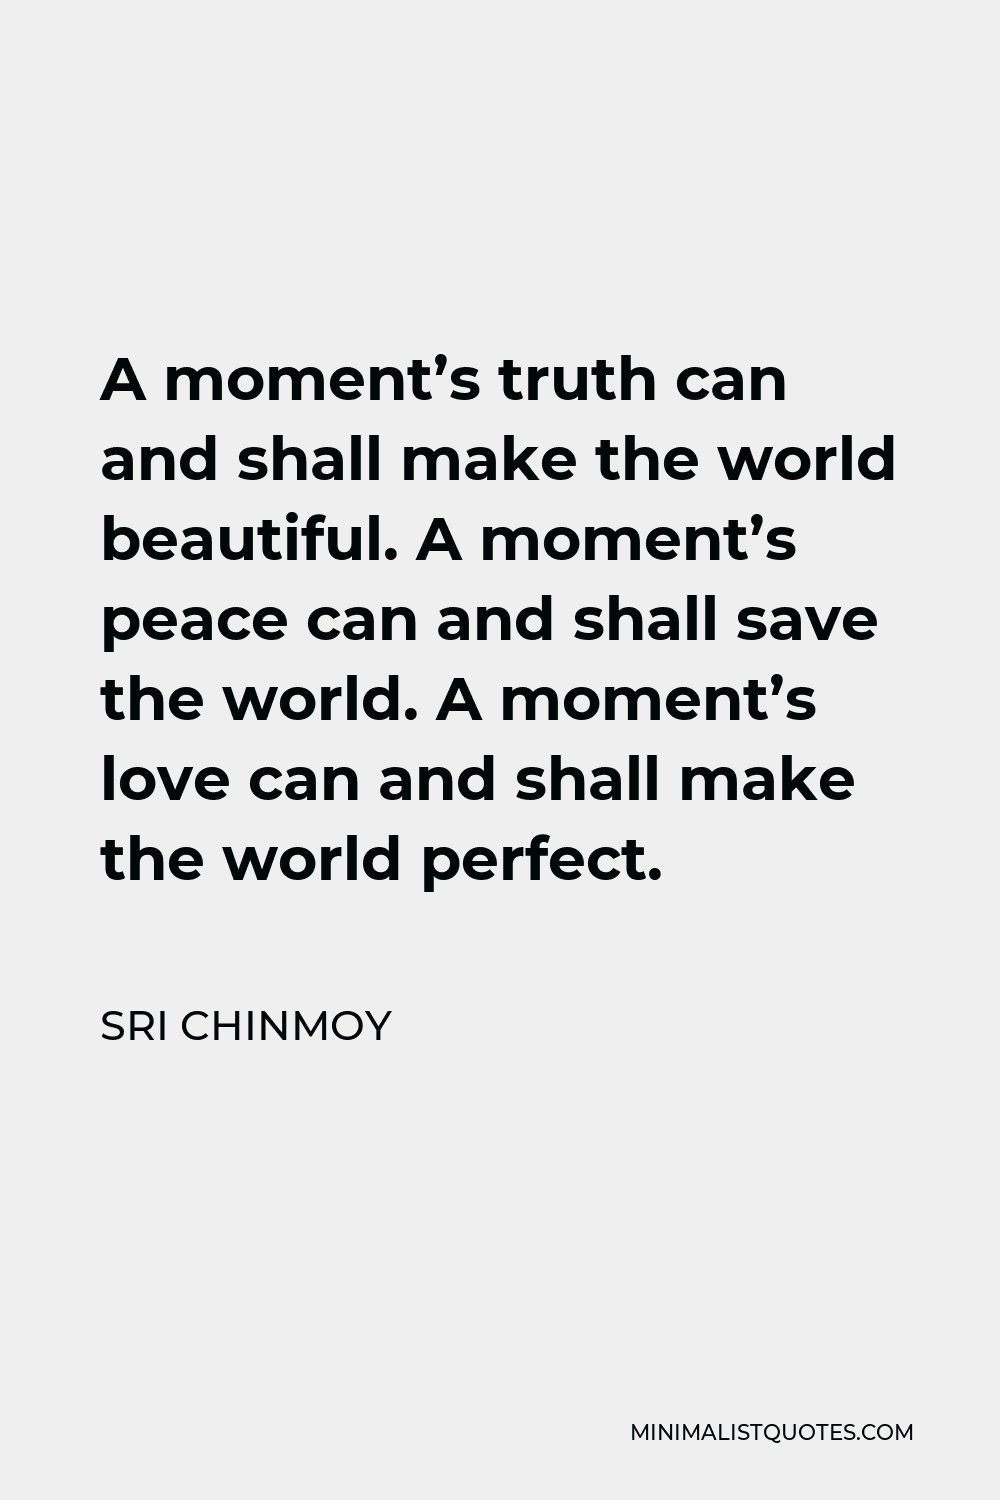 Sri Chinmoy Quote - A moment’s truth can and shall make the world beautiful. A moment’s peace can and shall save the world. A moment’s love can and shall make the world perfect.